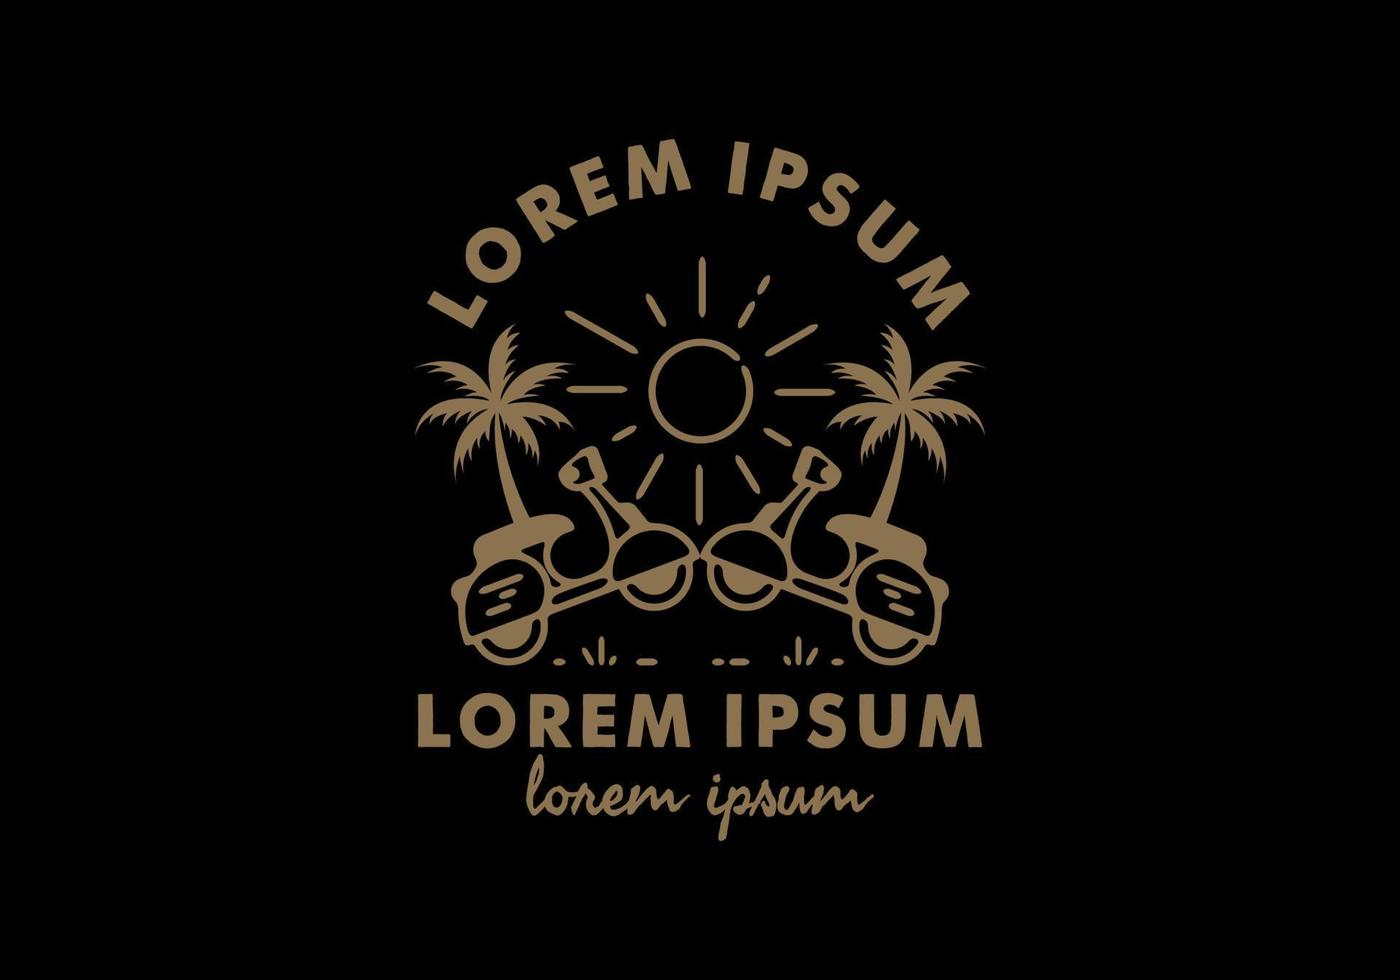 Scooter mania line art with lorem ipsum text vector